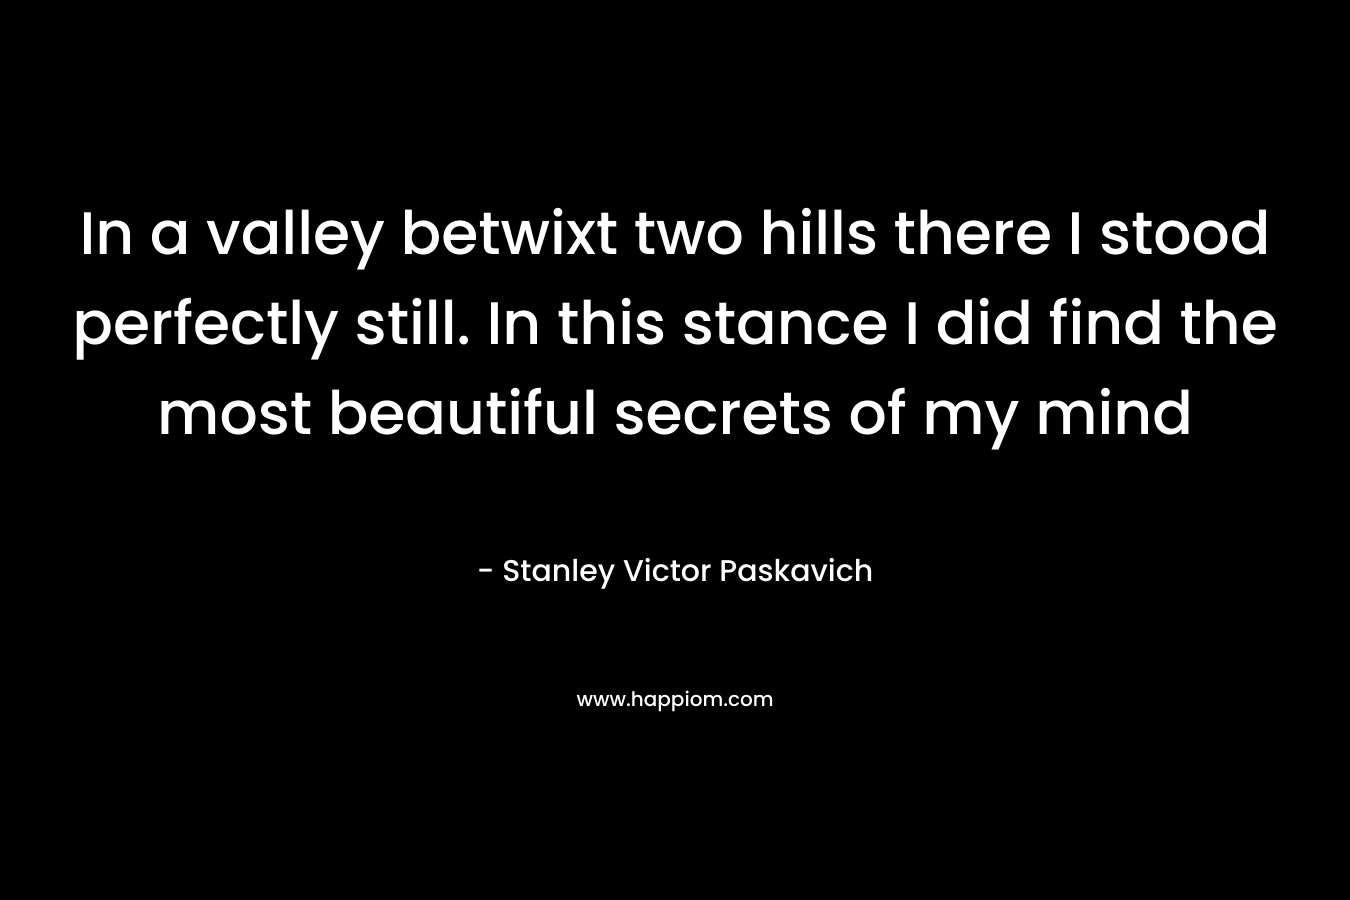 In a valley betwixt two hills there I stood perfectly still. In this stance I did find the most beautiful secrets of my mind